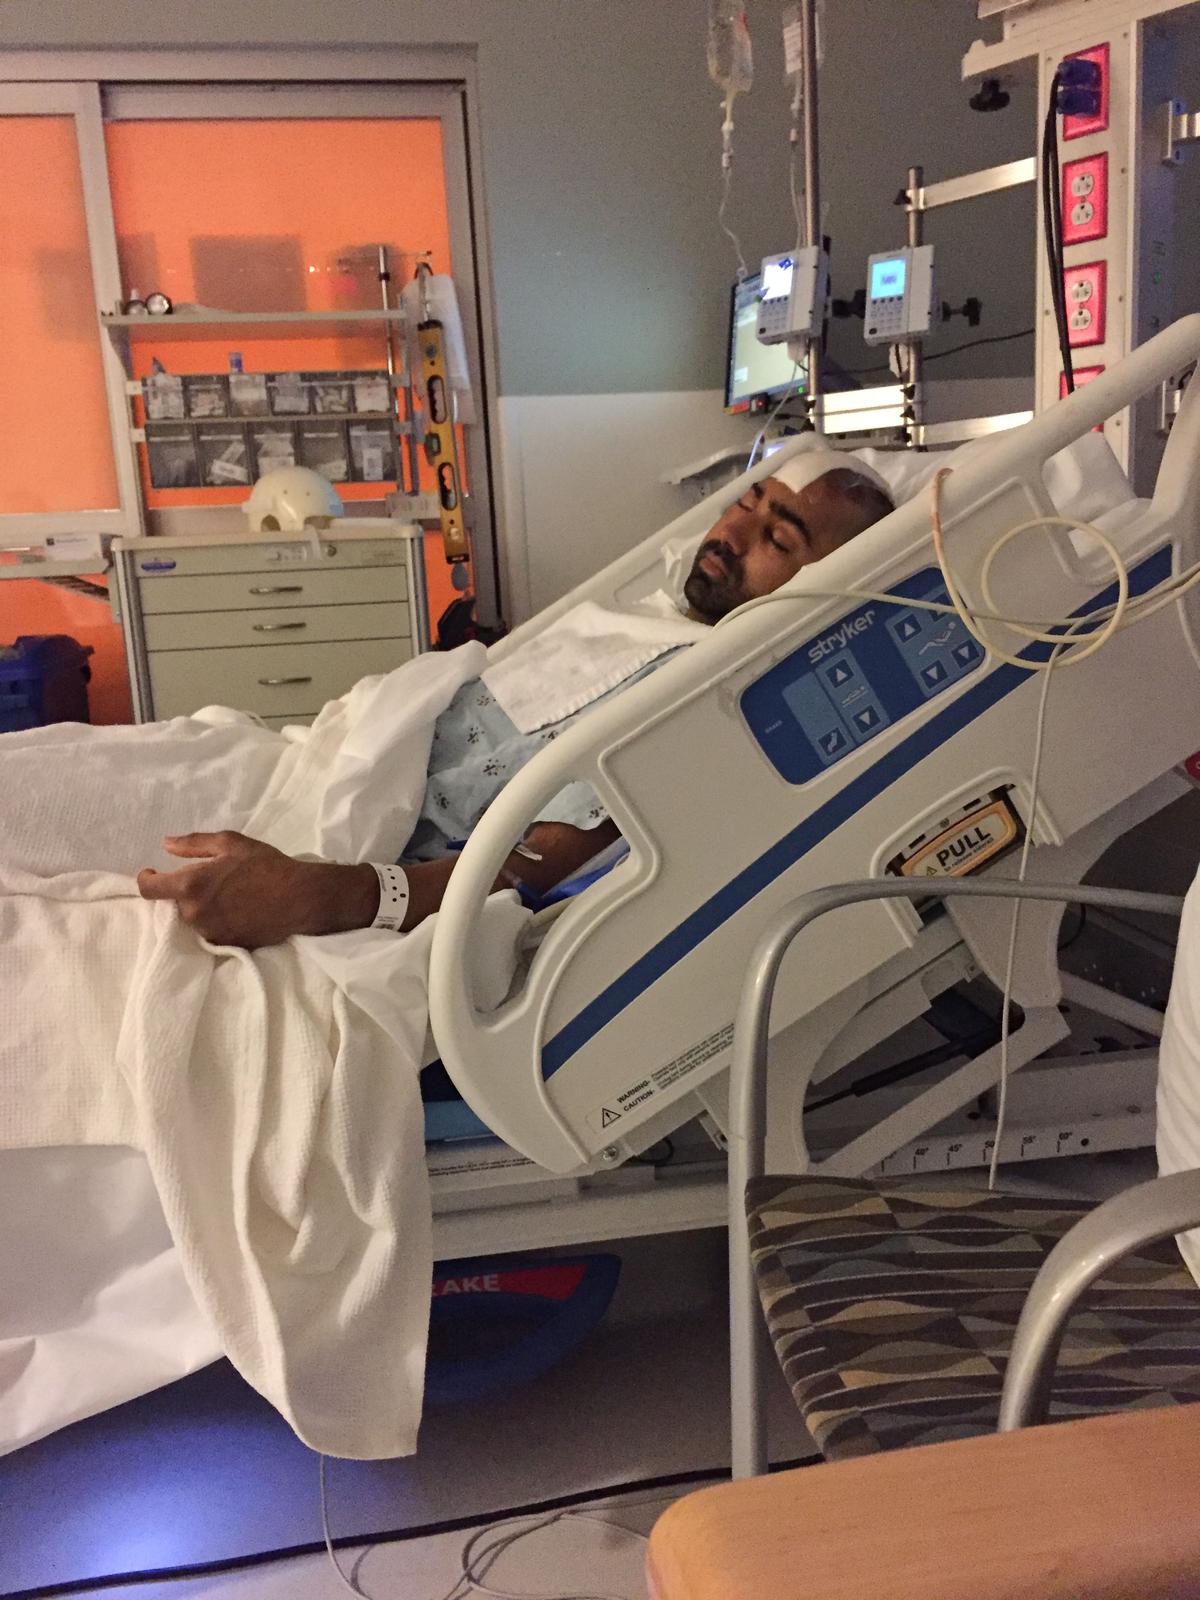 Chinna Balachandran, 31, in a hospital, Los Angeles, Calif. (Caters News)